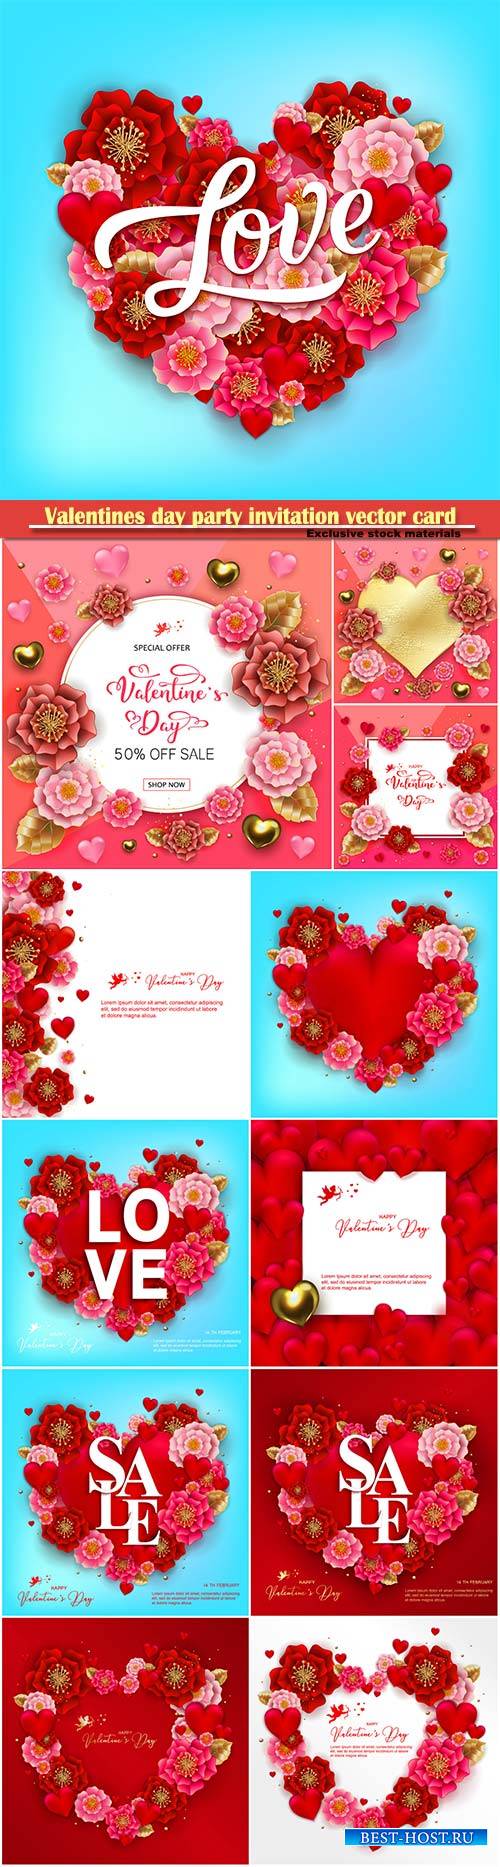 Valentines day party invitation vector card # 23